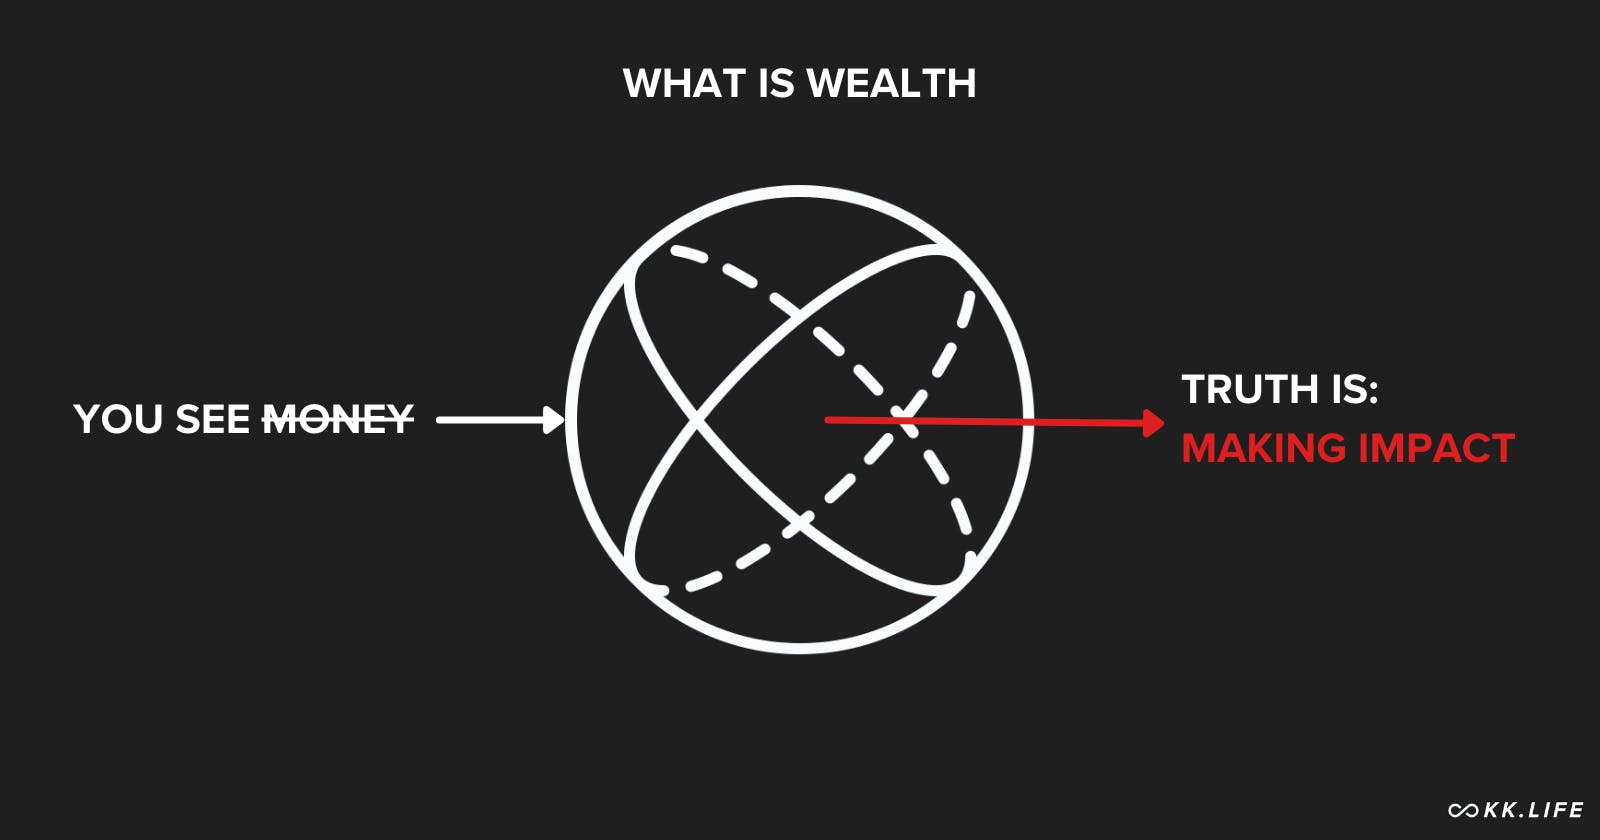 How to Build Wealth from Nothing